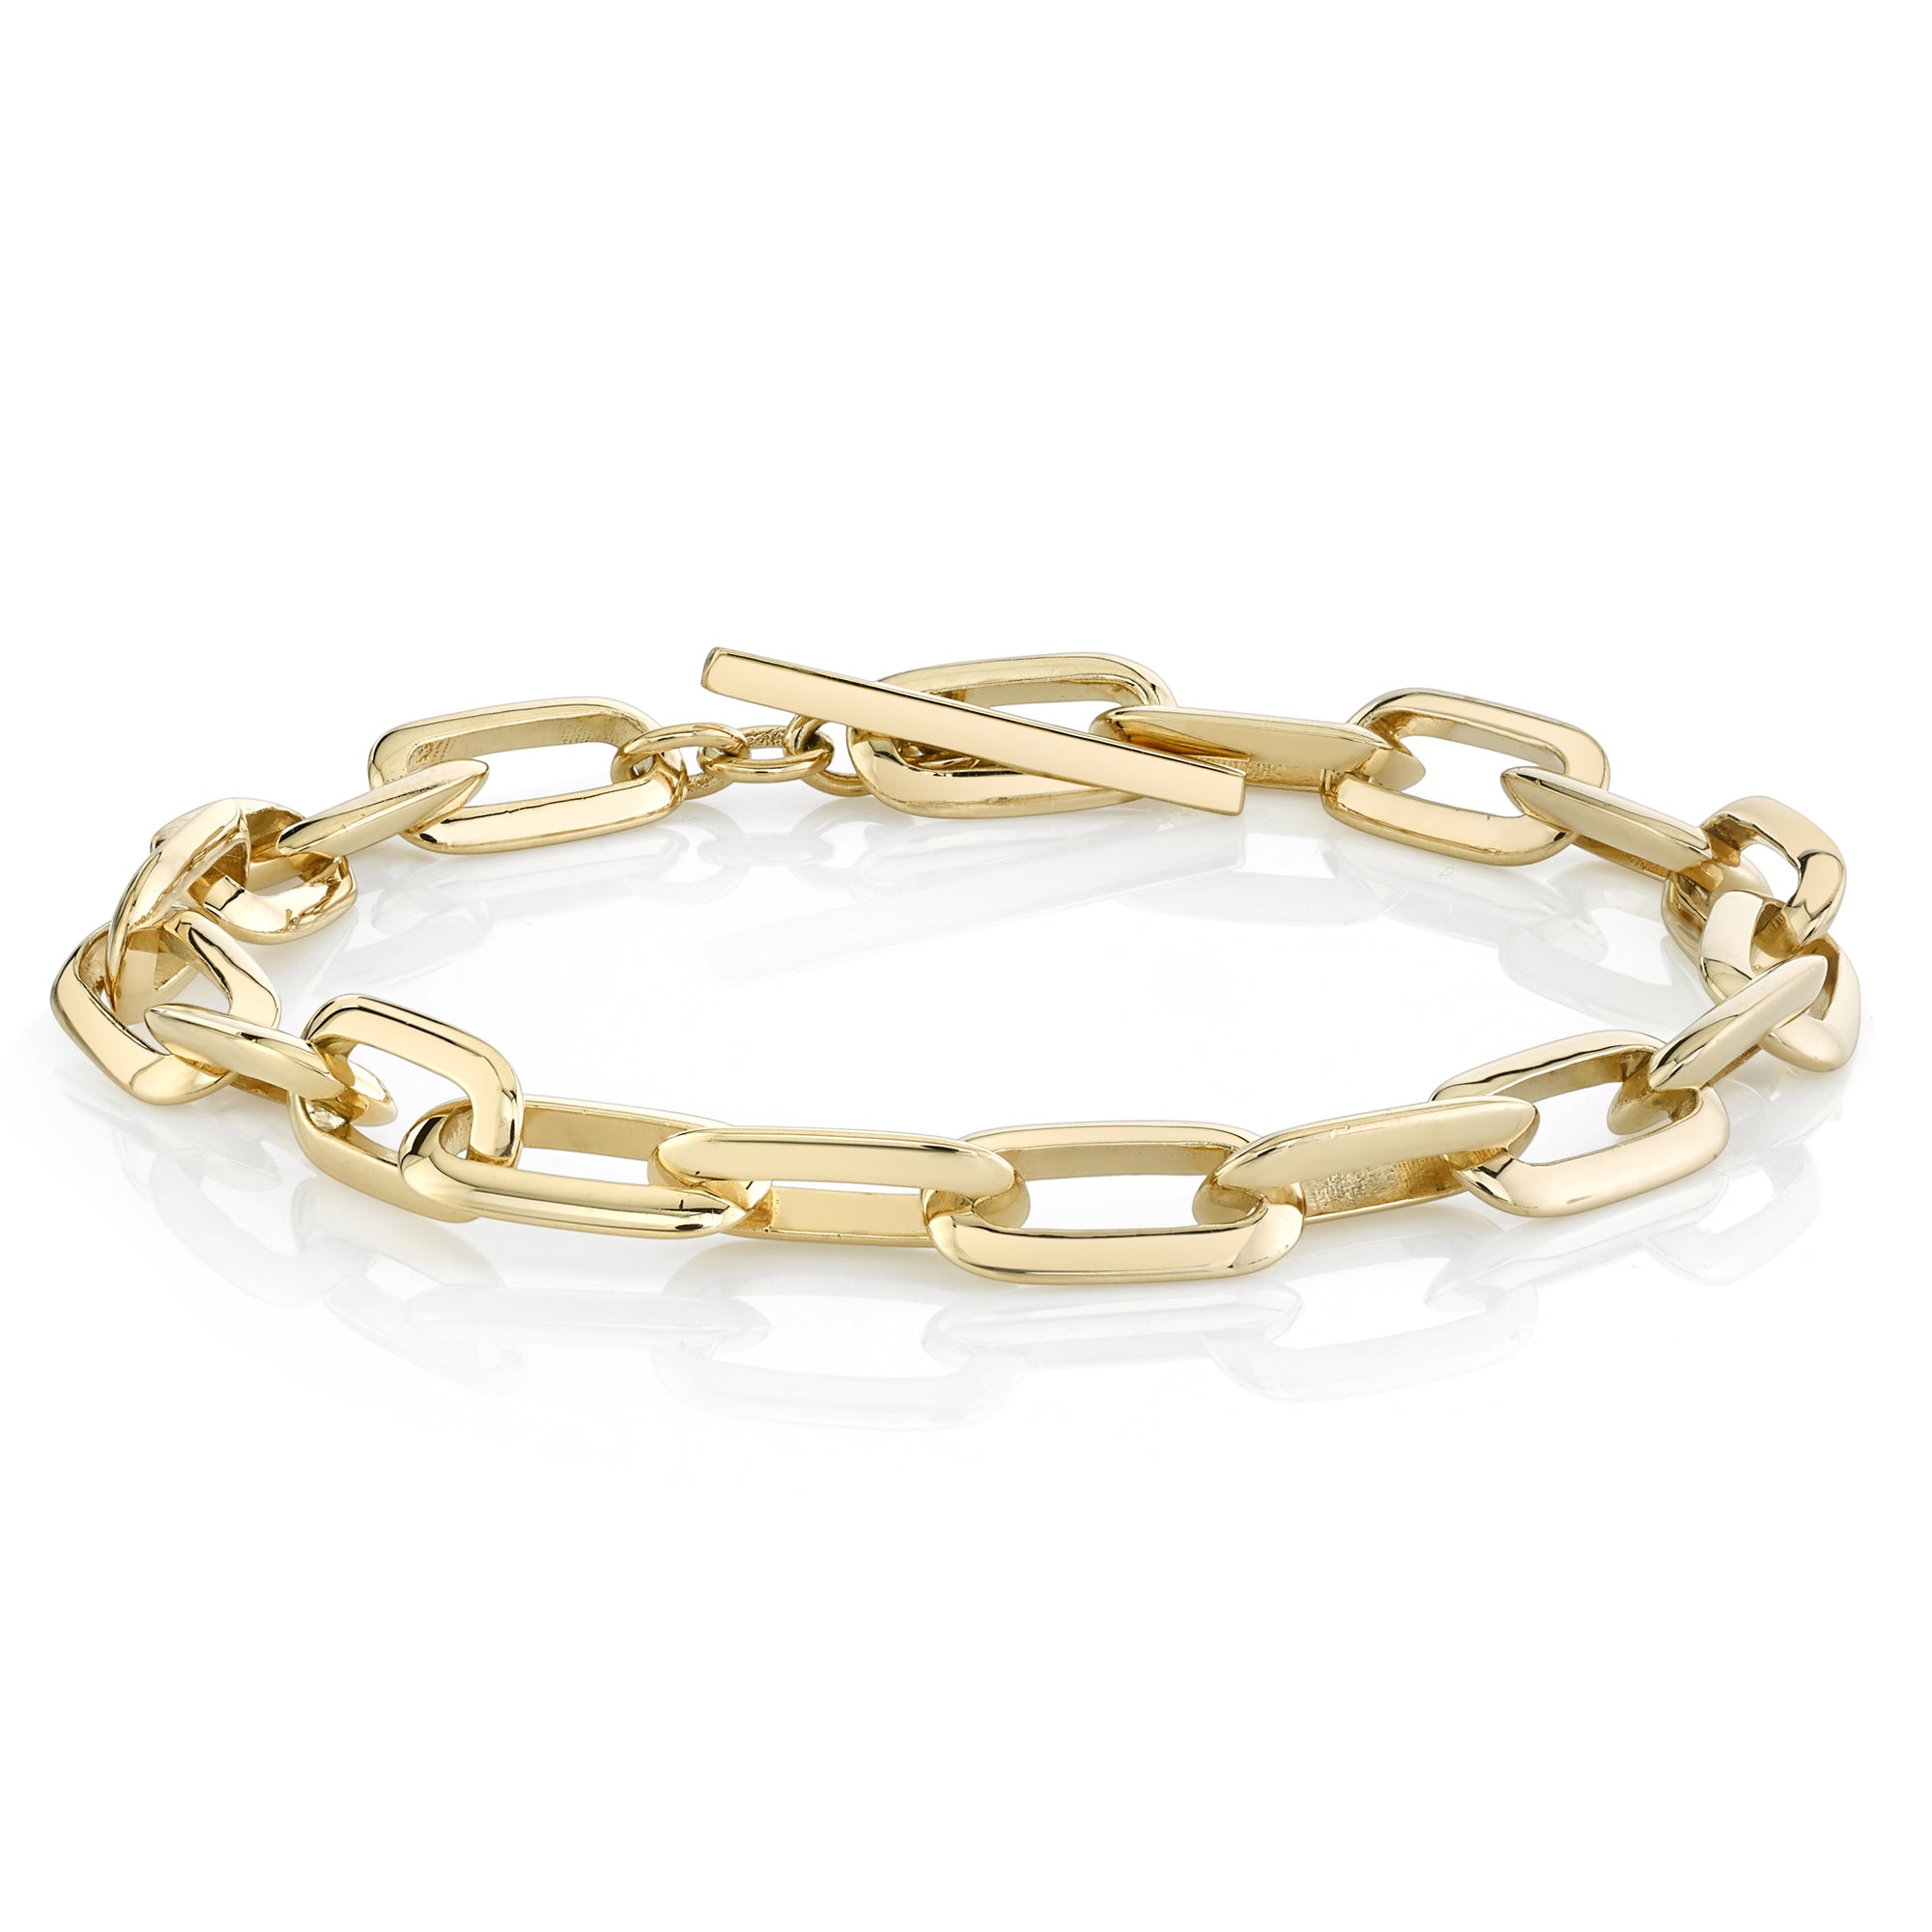 Sculpted Gold Wide Link Bracelet Designed as a series of undulating  crescent shaped links circa 1970 SizeDimensions 7 14 inches  Instagram